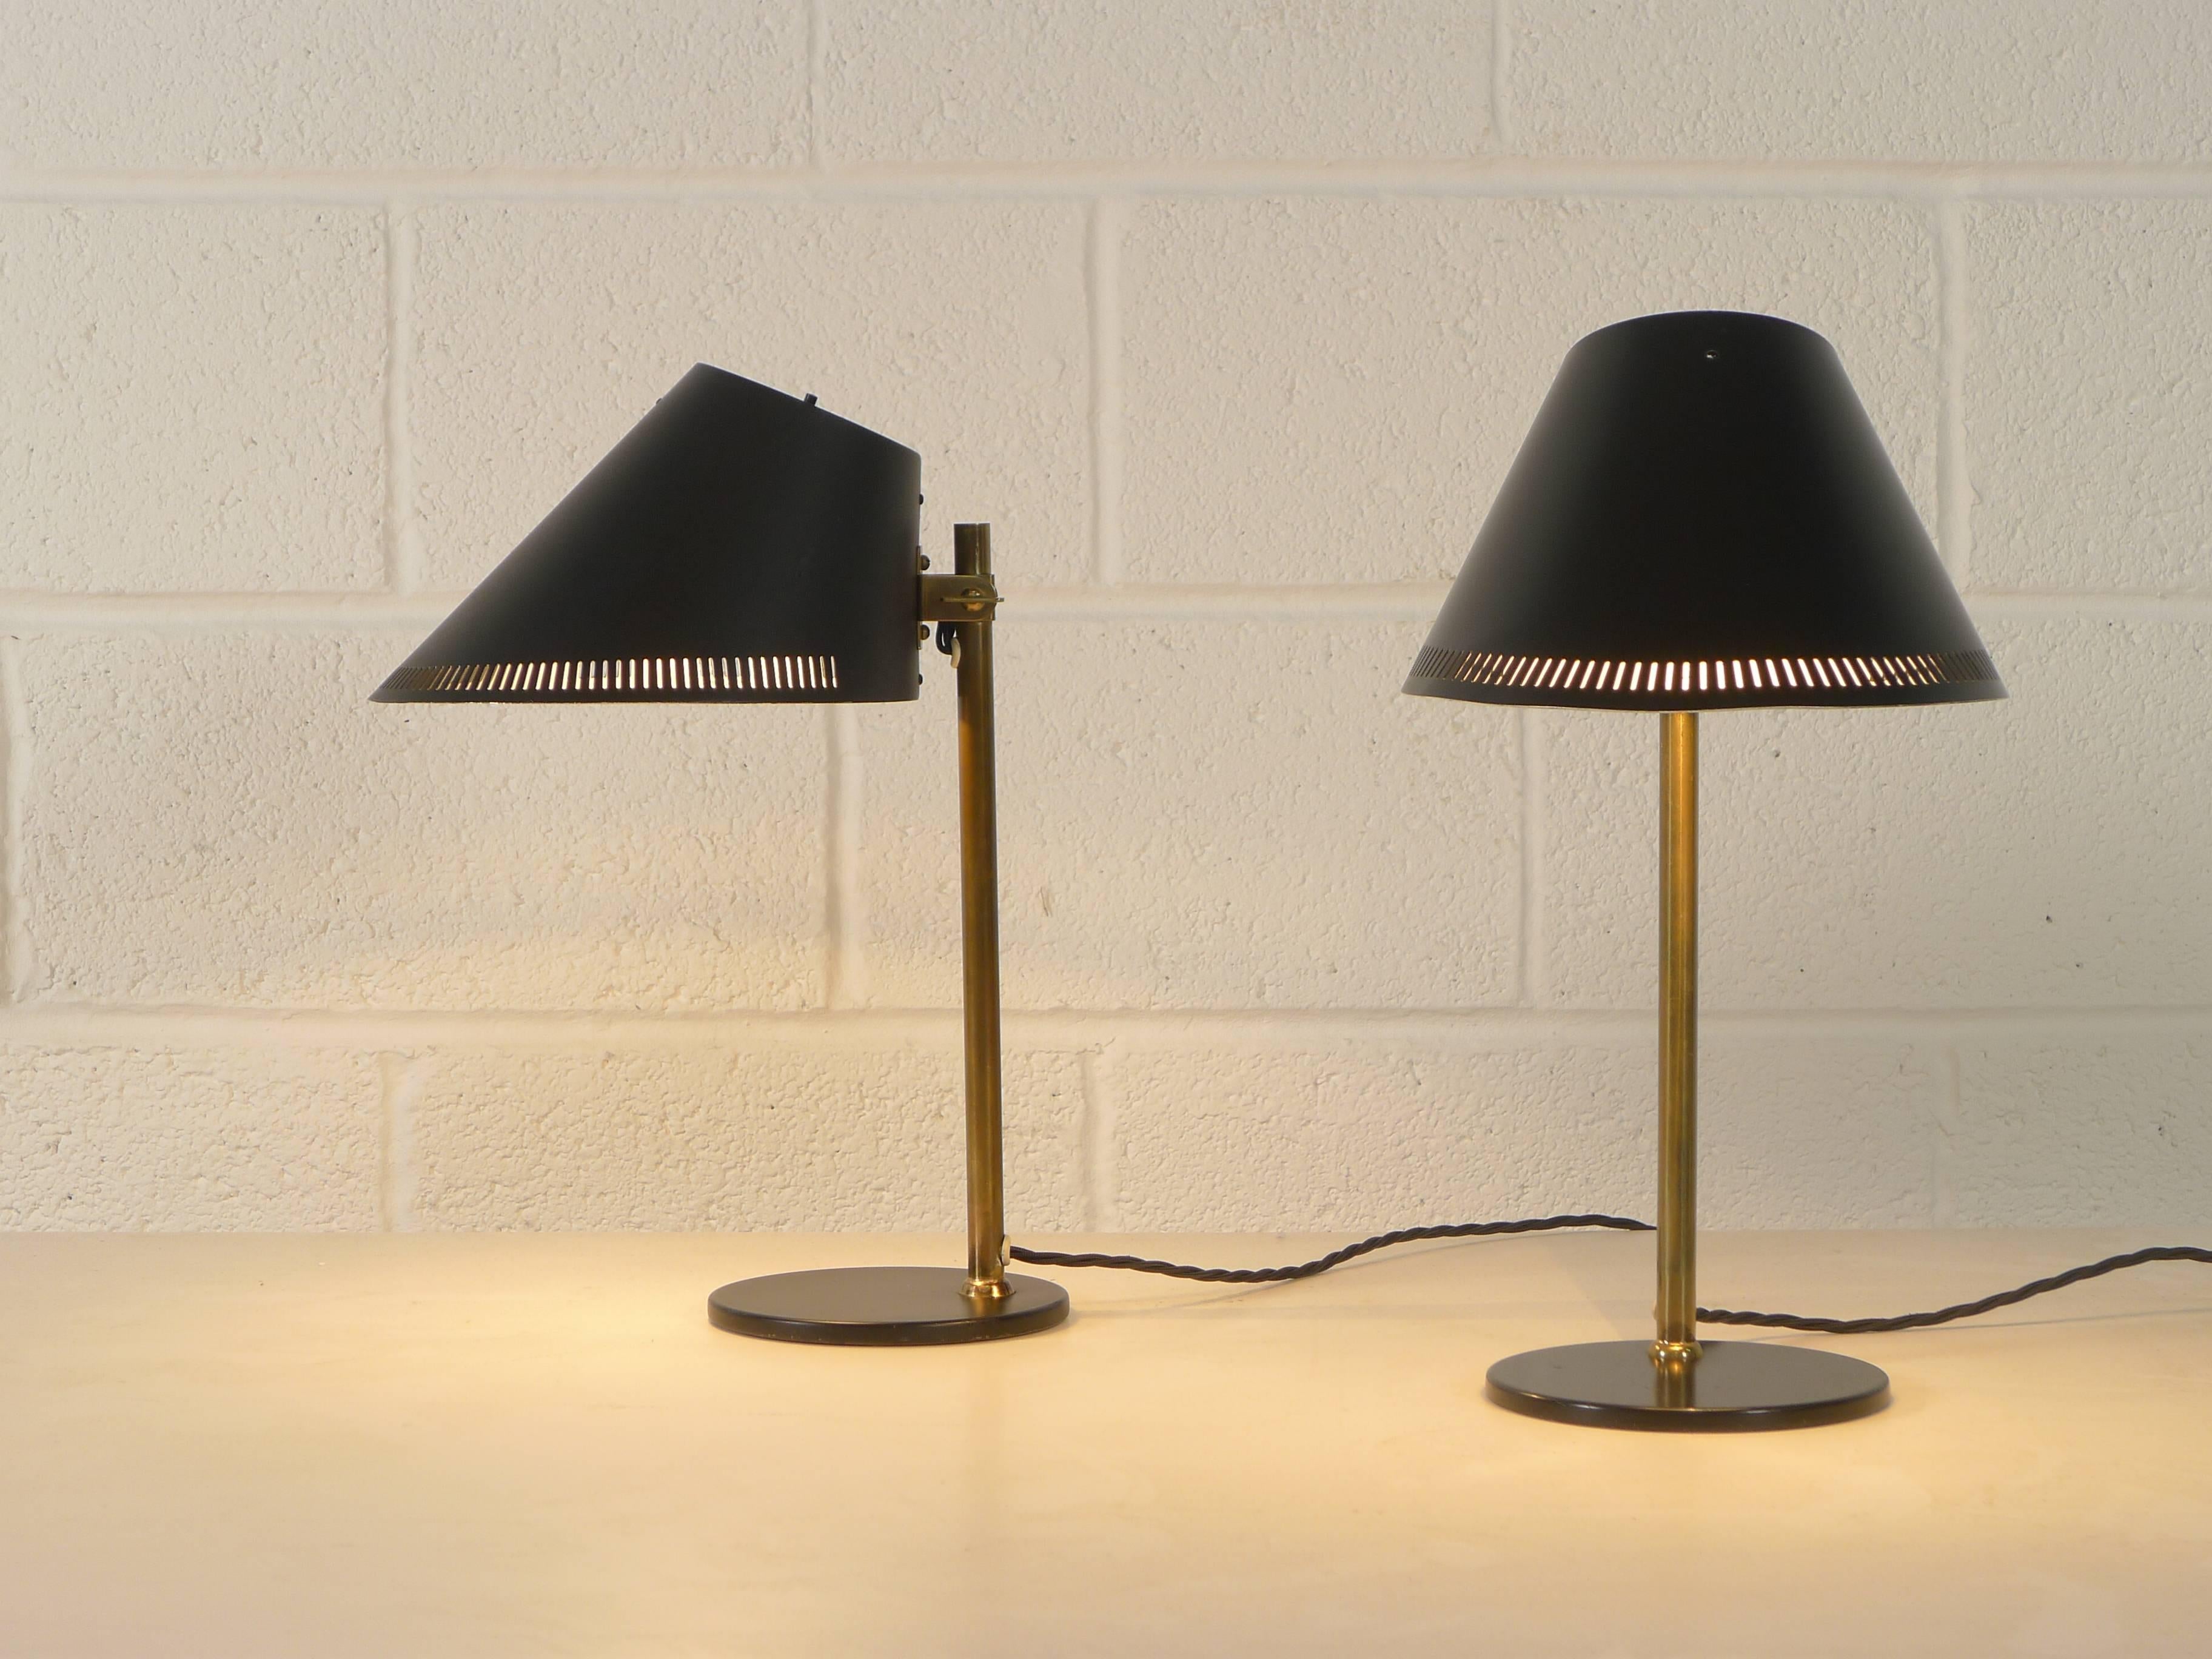 Paavo Tynell, Pair of Desk Lamps with Black Enamel Shades, Idman Production 2